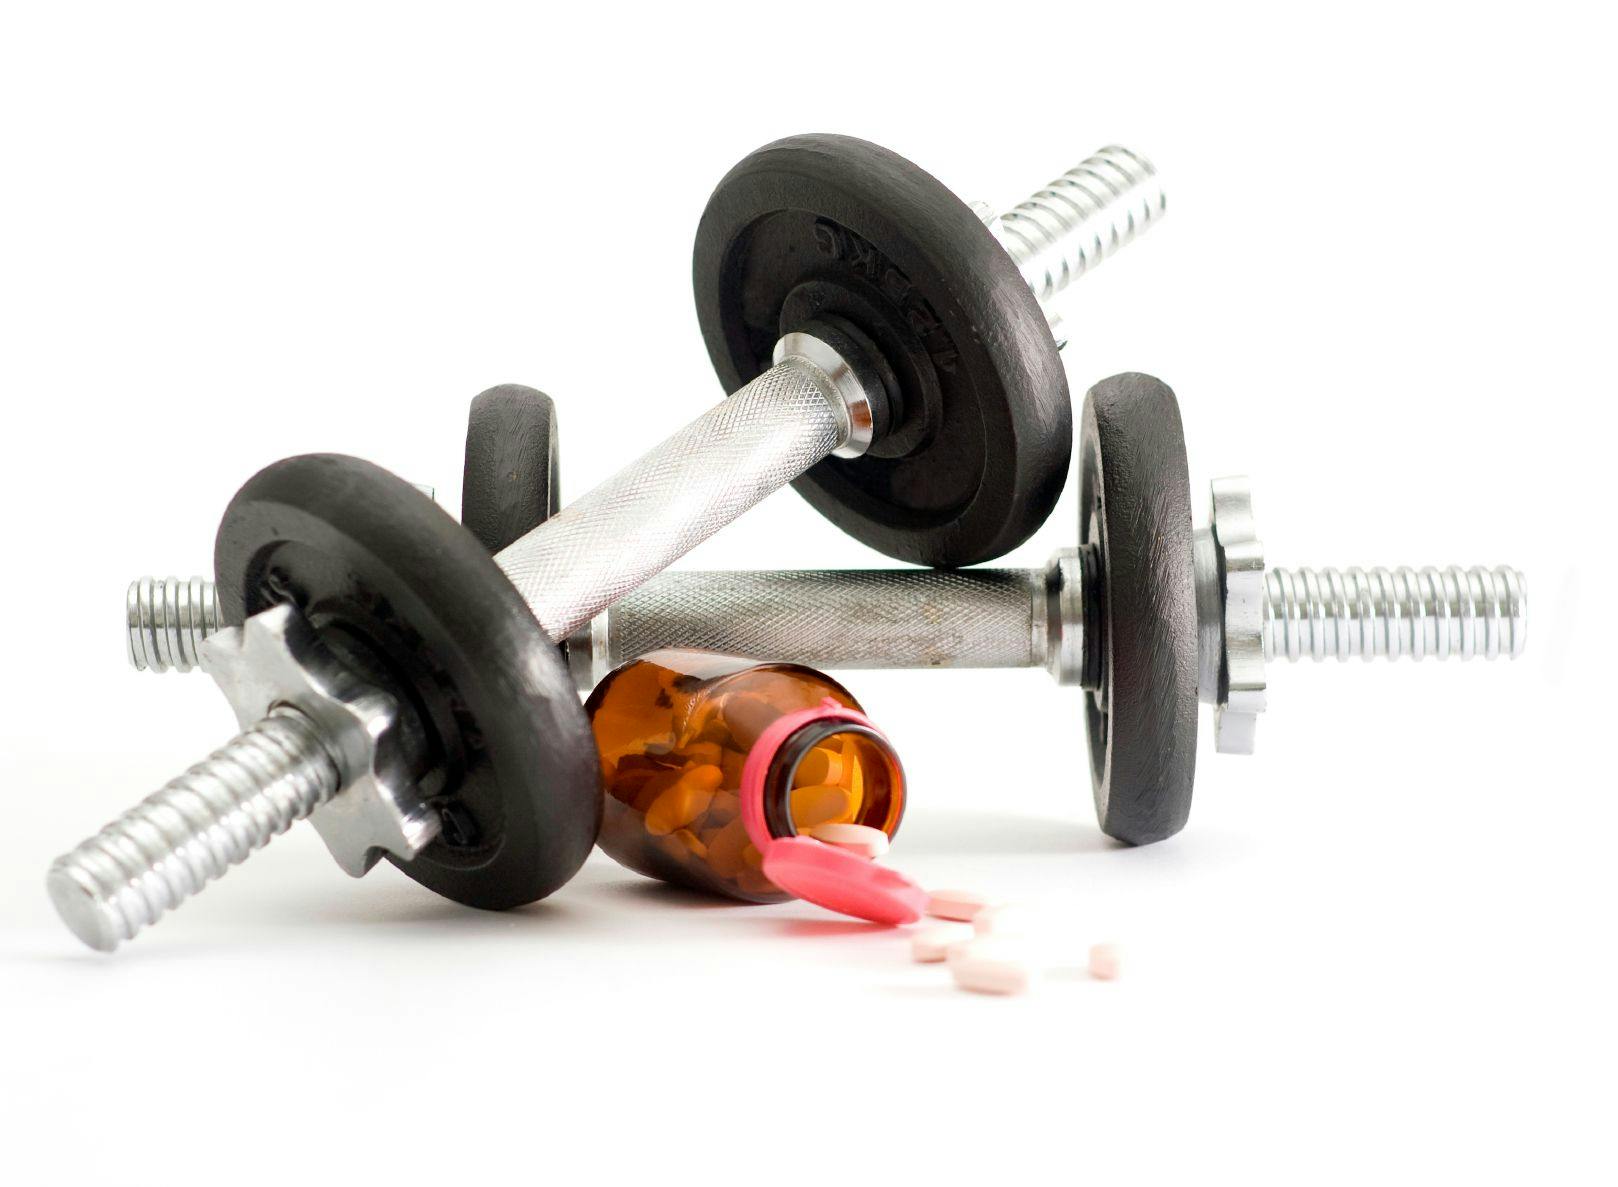 Which Are Emerging Adulterants in Sports Supplements?